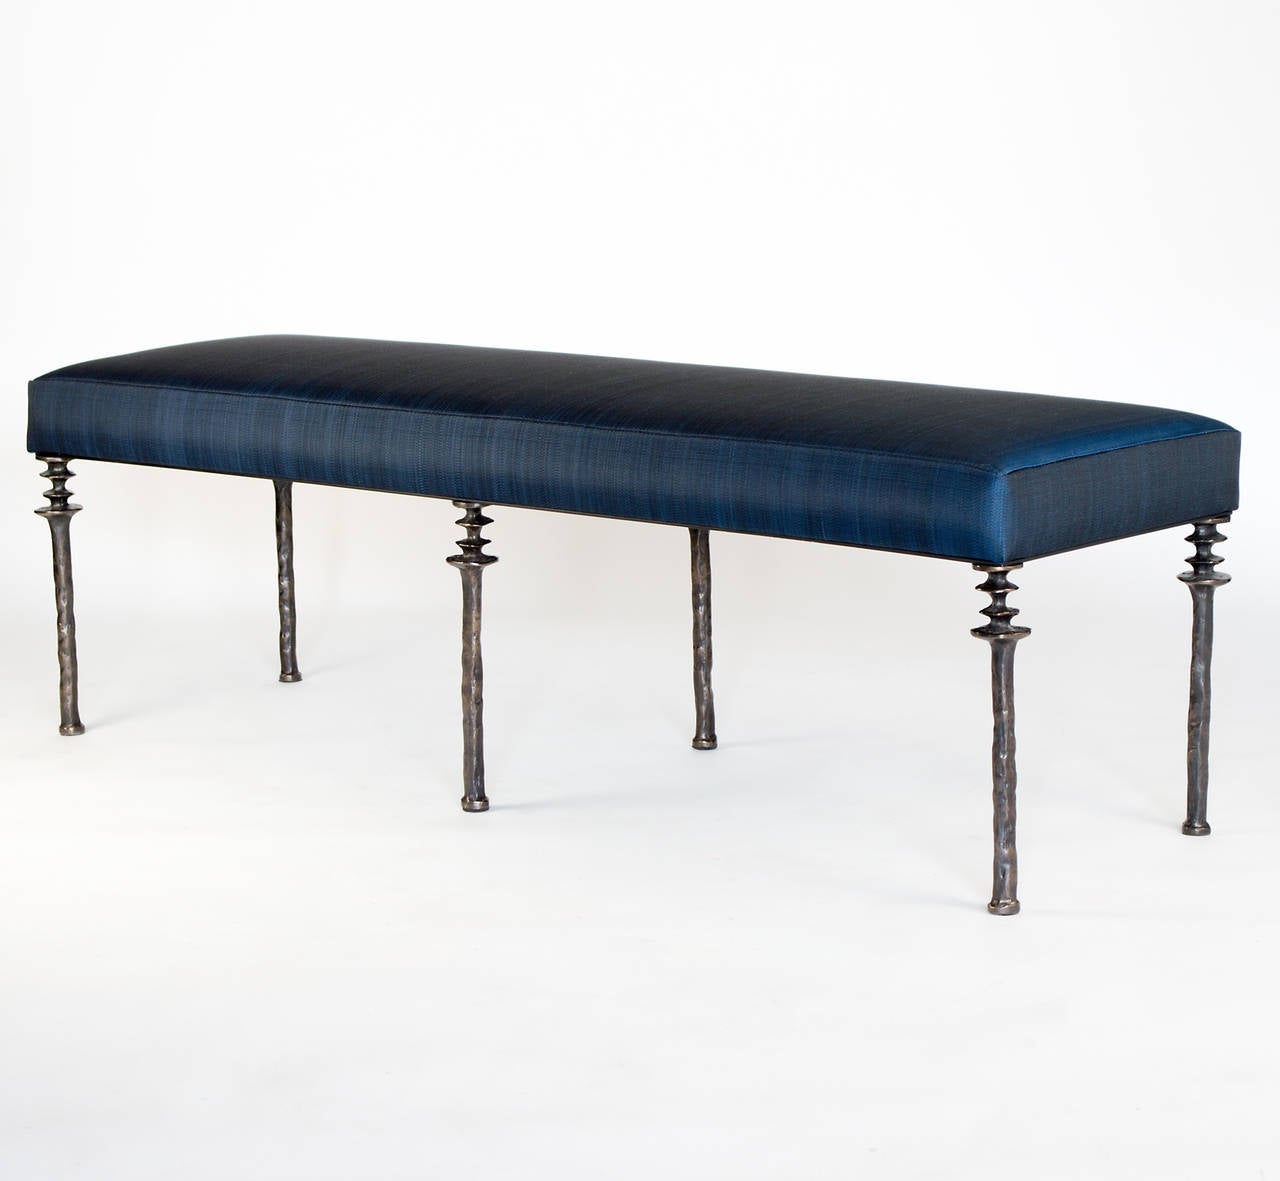 Insipred by Diego Giacometti, this bench is ideal for those who are looking
for unique seating. Their cast bronze legs provide a truely organic touch.  The cushion is upholstered in blue woven horse hair fabric.  Bench is located in our showroom in